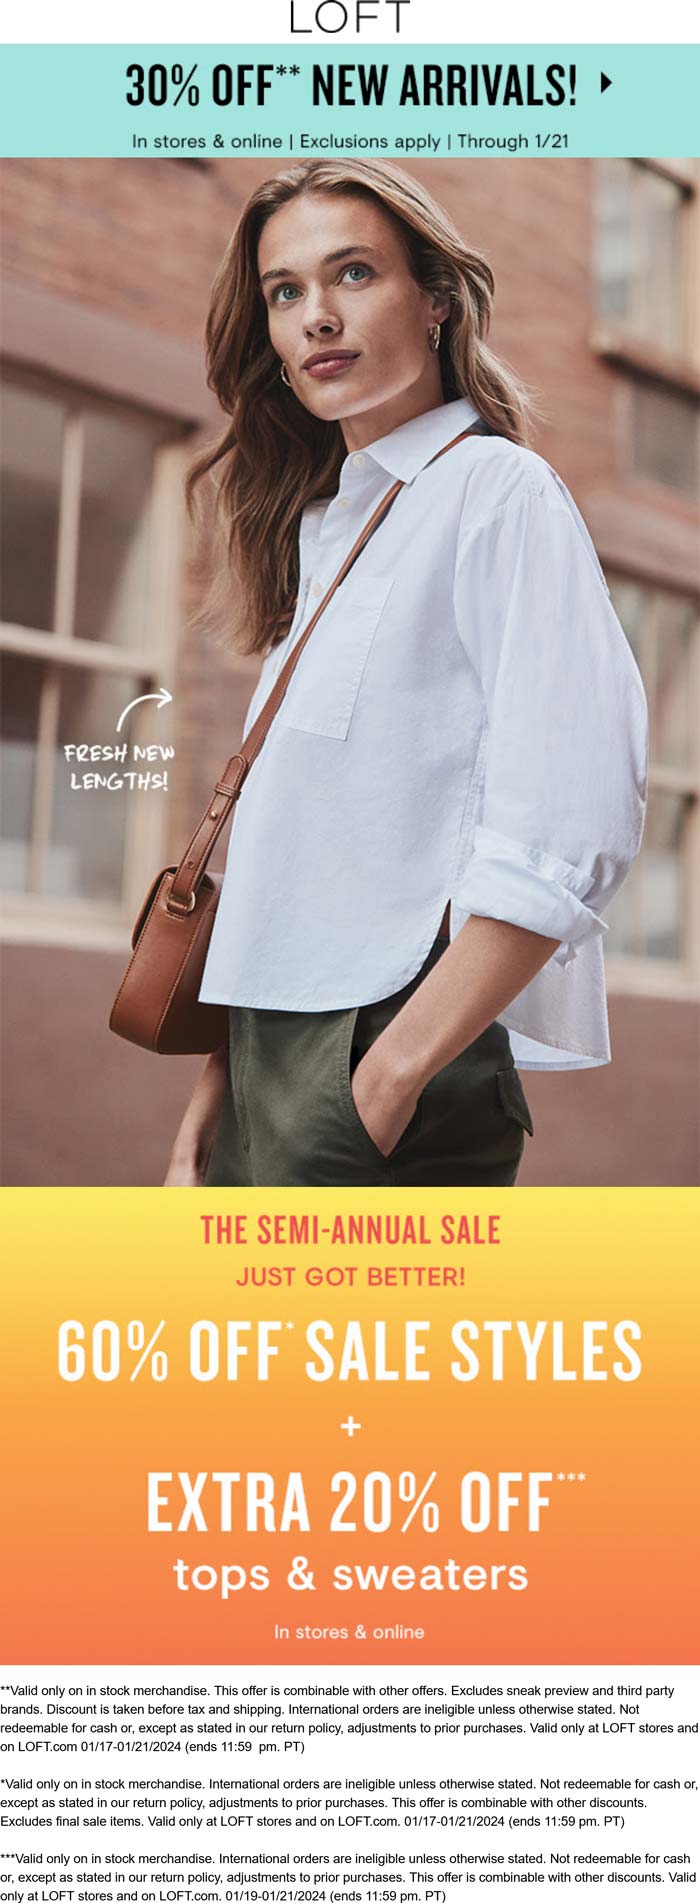 LOFT stores Coupon  Extra 20% off tops & sweaters + 60% off sale styles at LOFT, ditto online #loft 